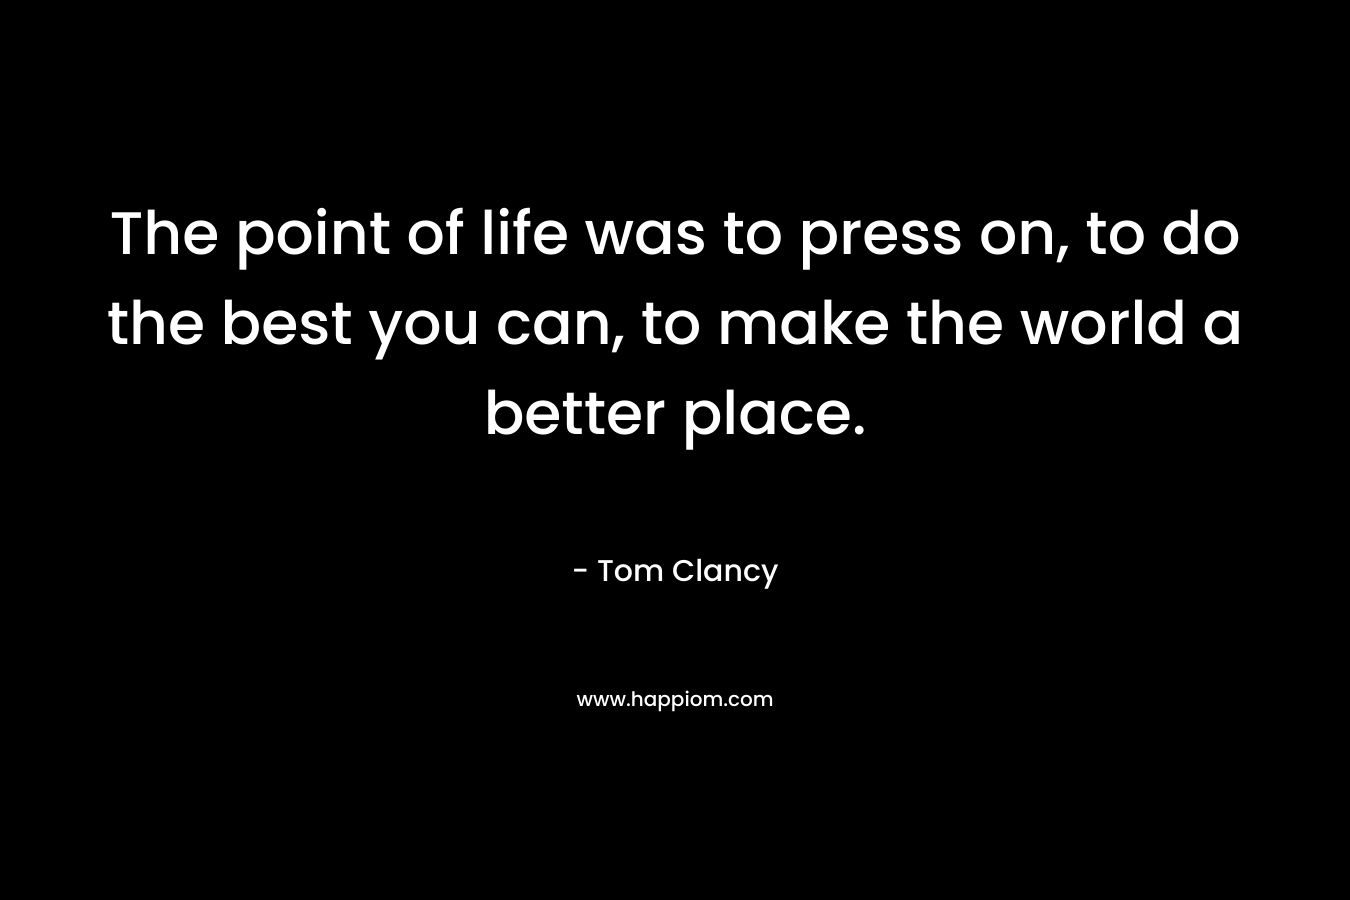 The point of life was to press on, to do the best you can, to make the world a better place.